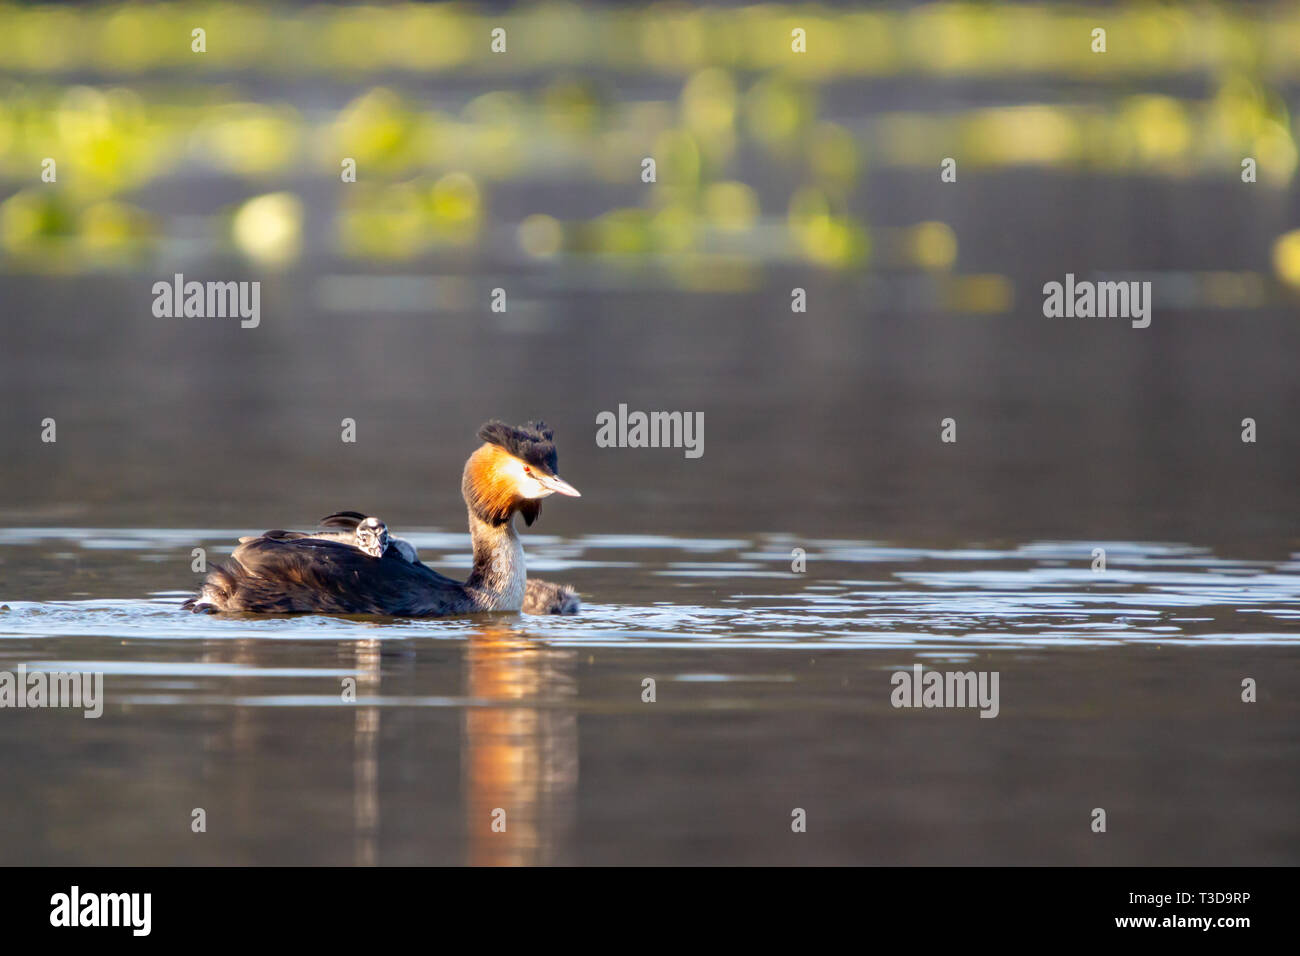 Colour wildlife portrait photograph of adult Great crested grebe (Podiceps cristatus) with chick on back whilst swimming on water. Taken on Hatchpond, Stock Photo